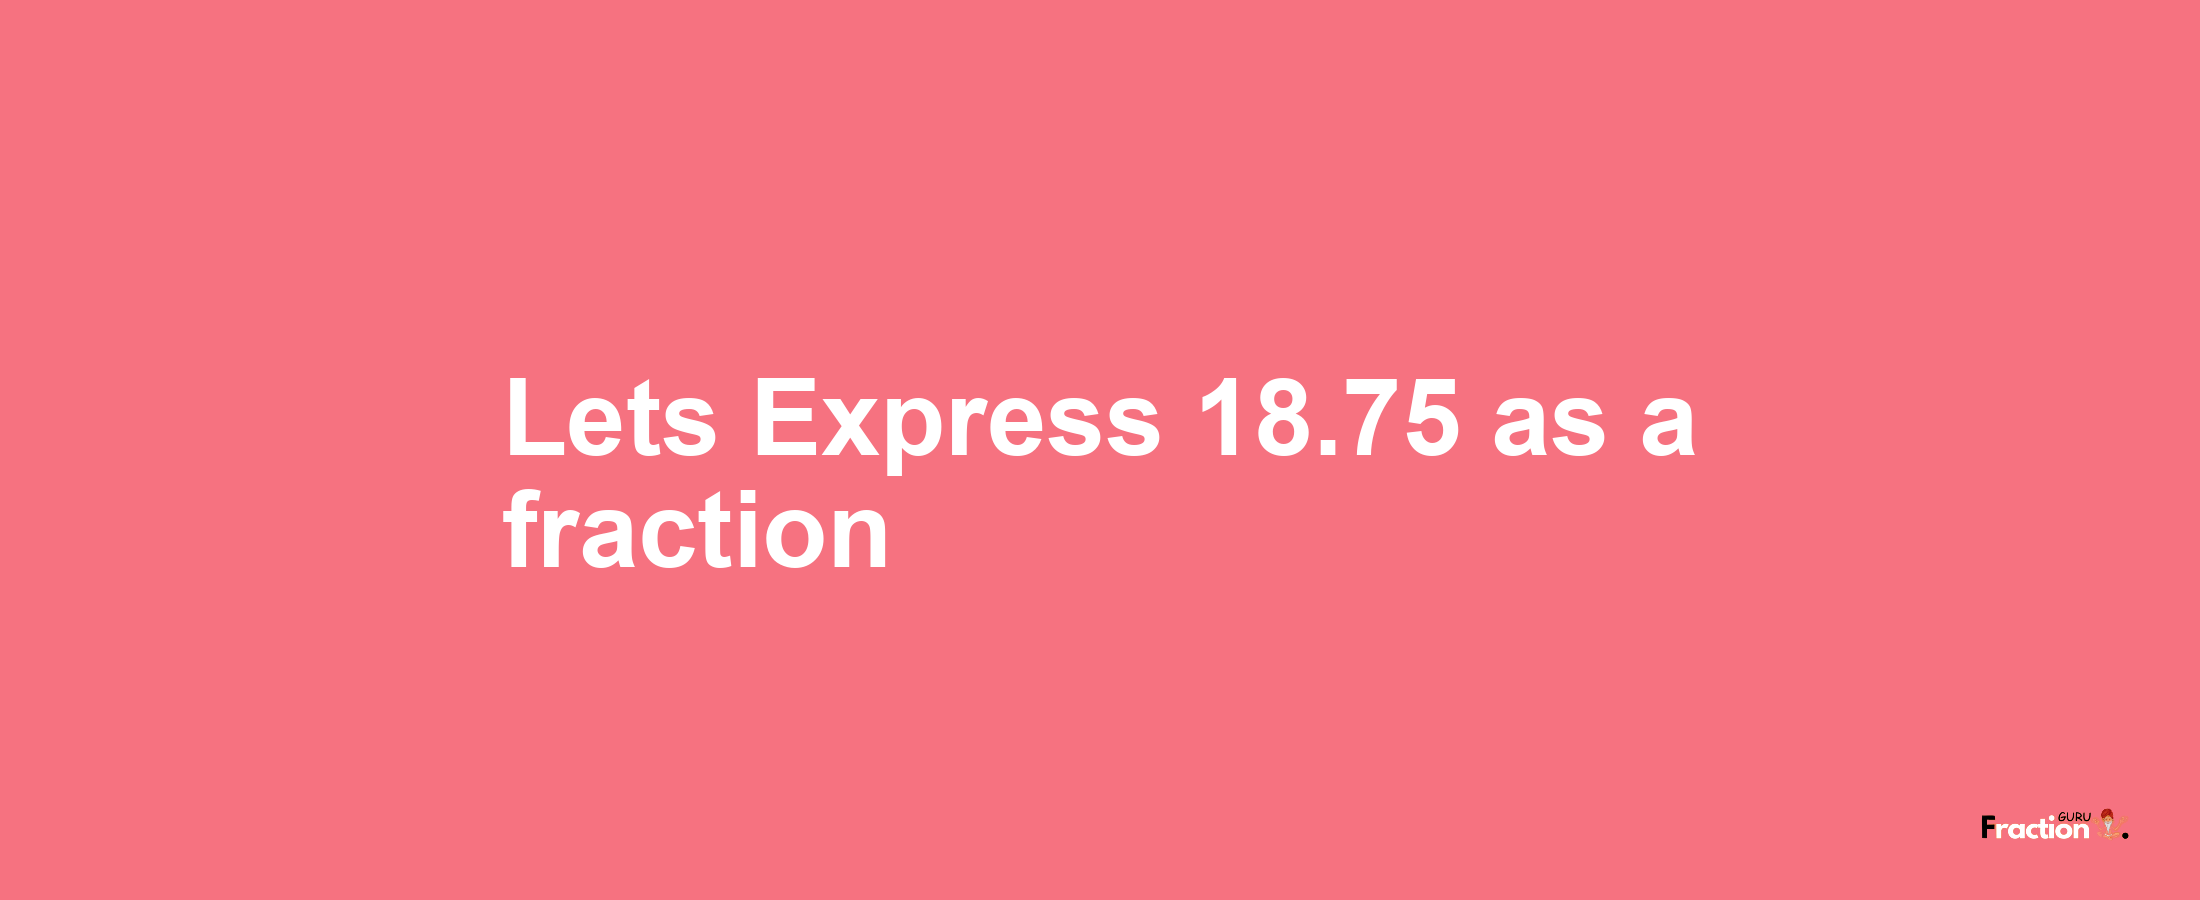 Lets Express 18.75 as afraction